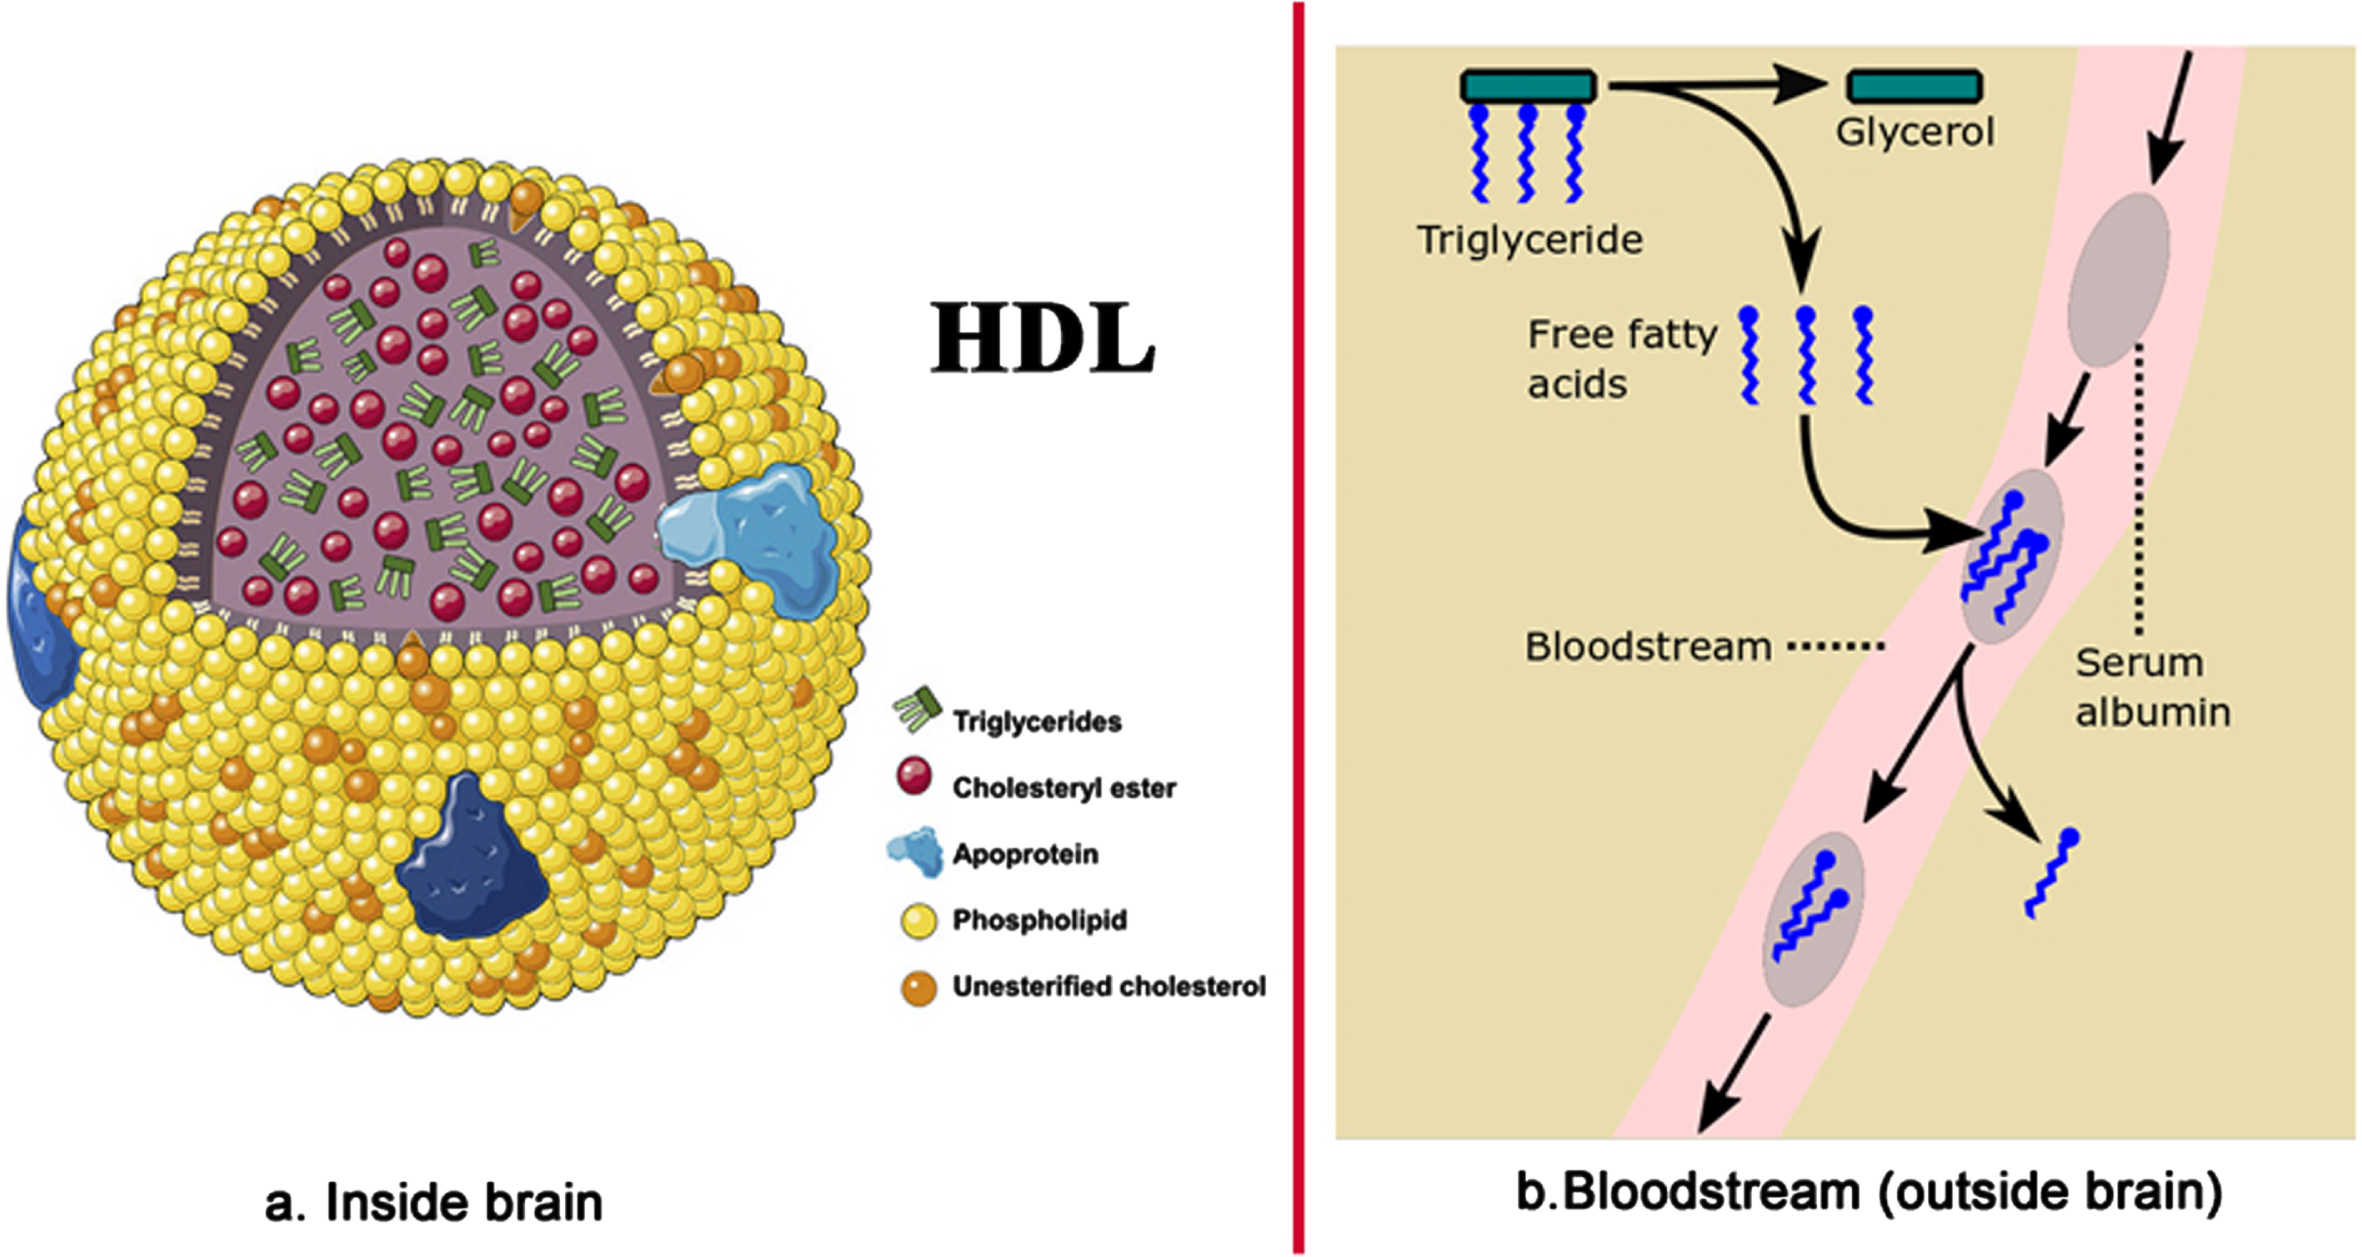 Fatty acid transport (a) inside the brain – inside HDL-sized lipoproteins, and (b) in the bloodstream outside of the brain. Image source: (a) [86], licensed under CC BY-NC-ND 4.0.